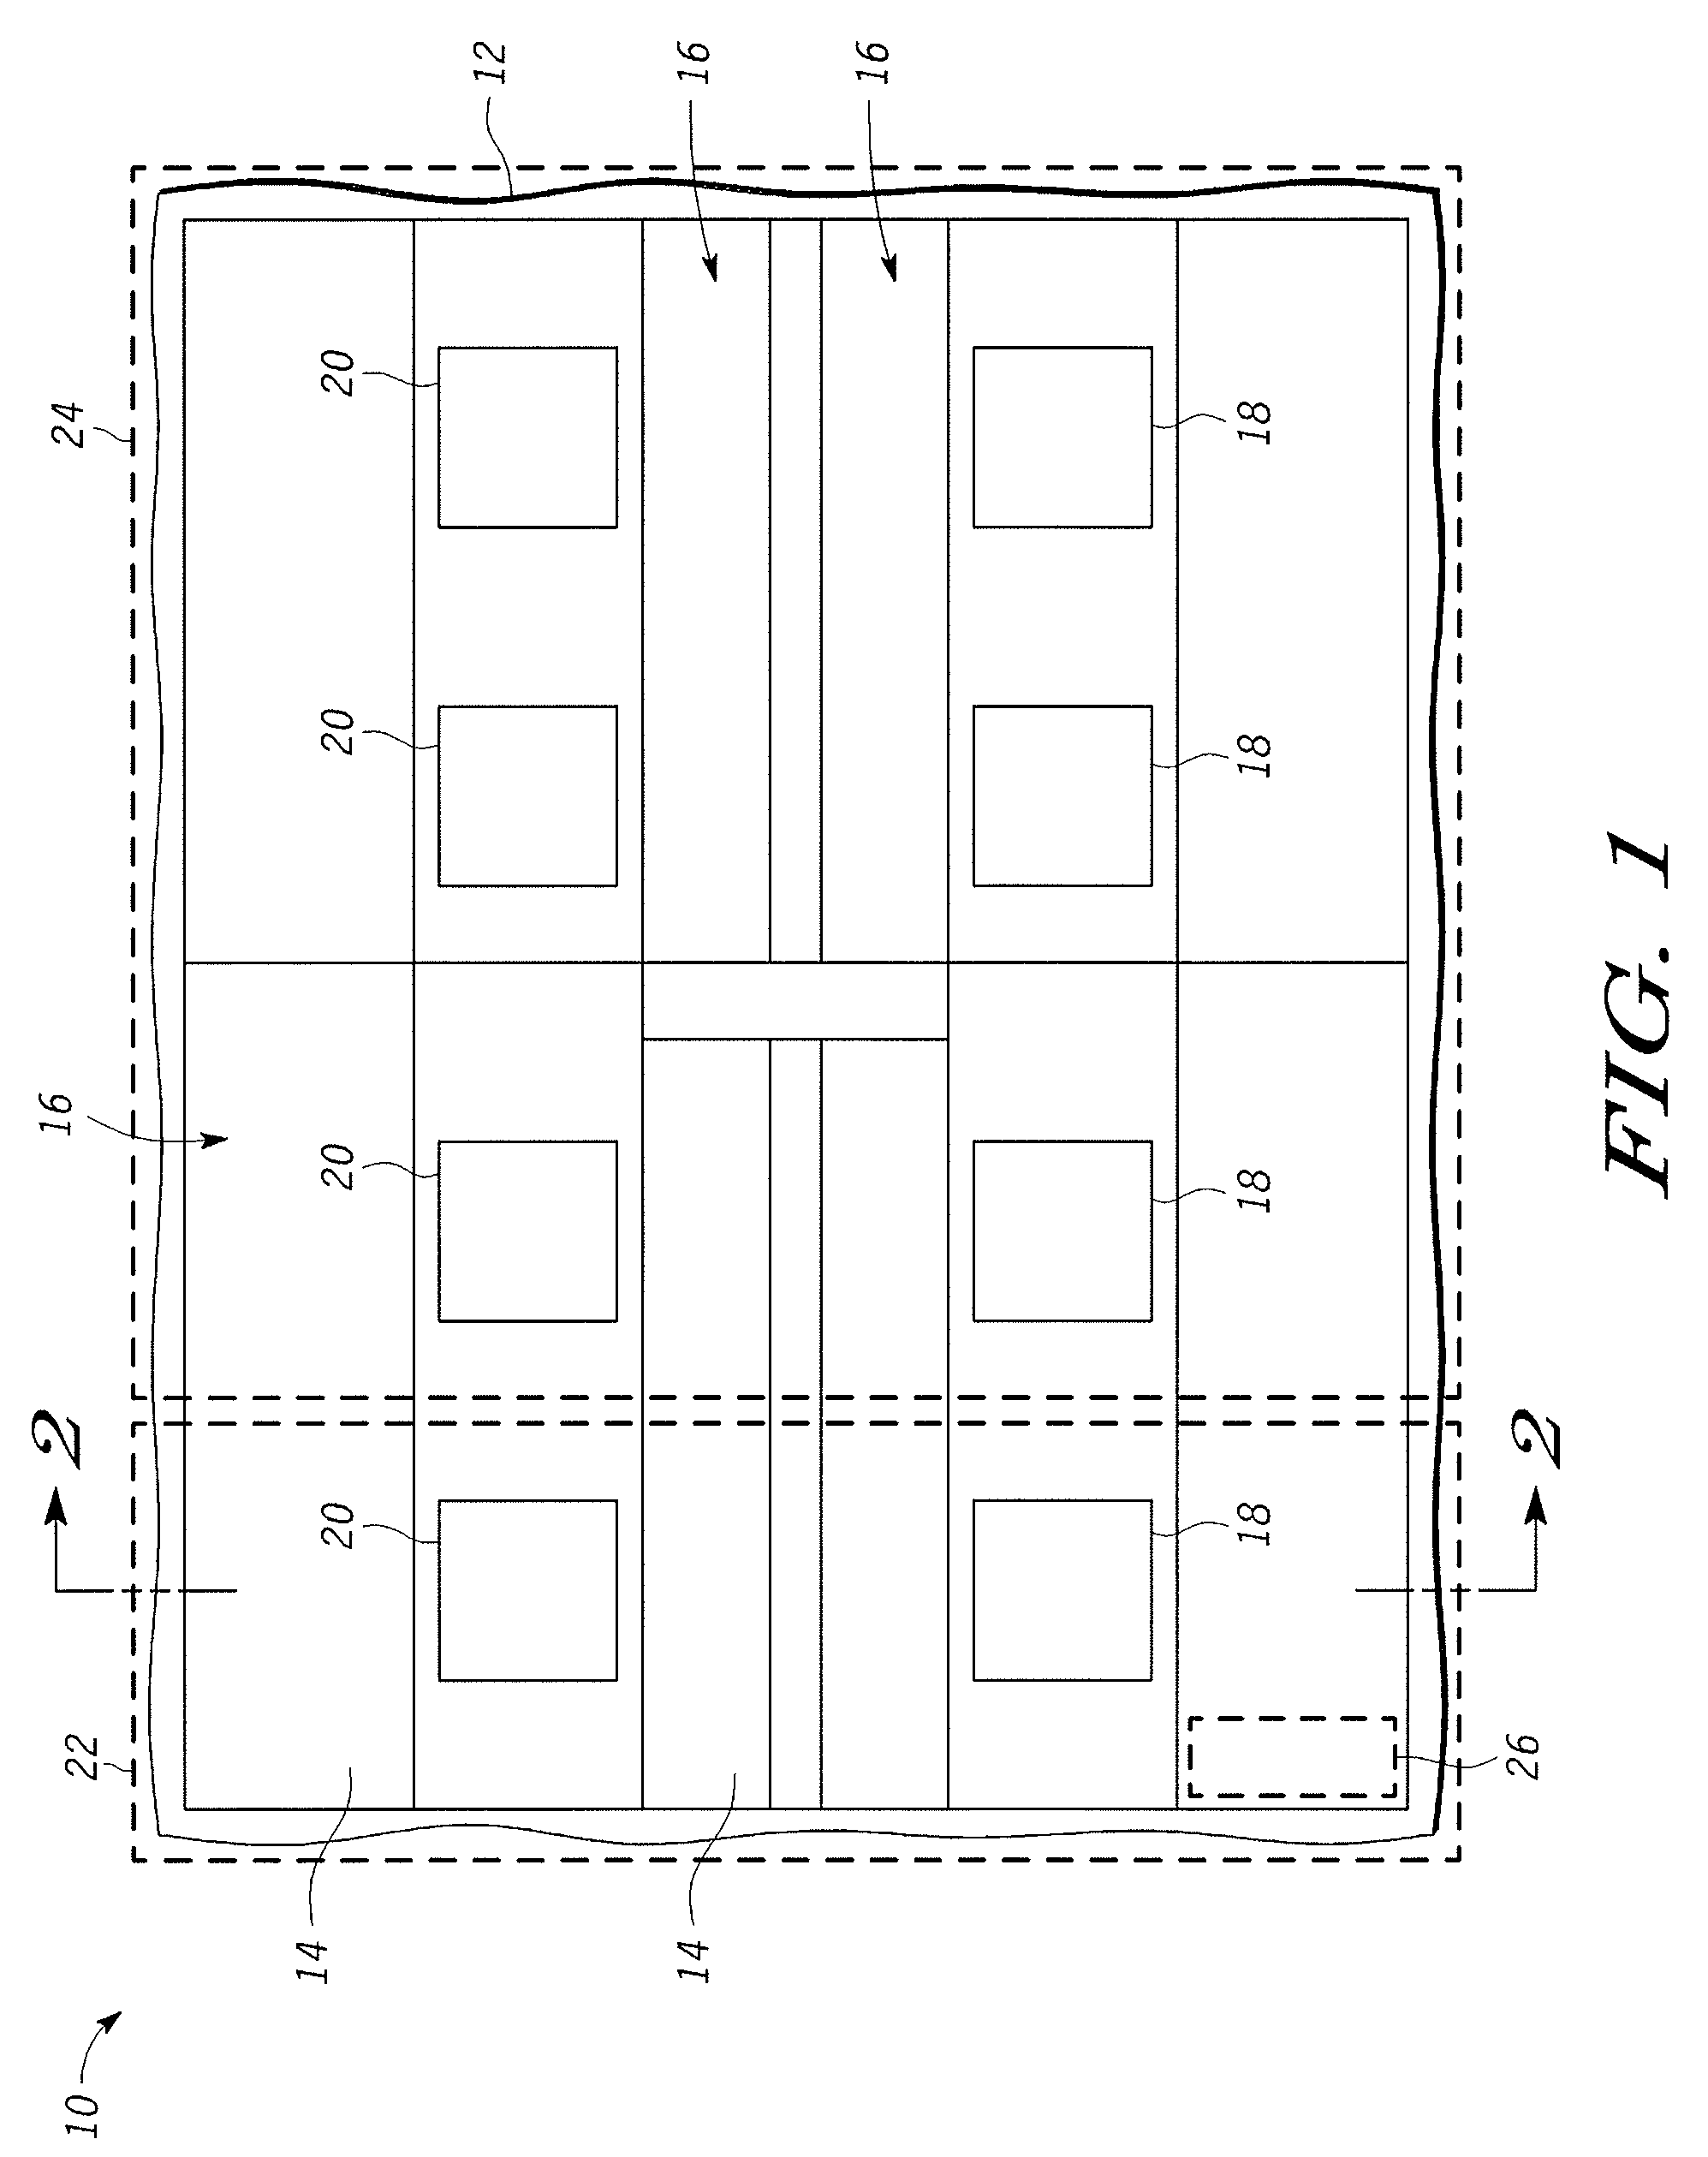 System and method for reducing current in a device during testing